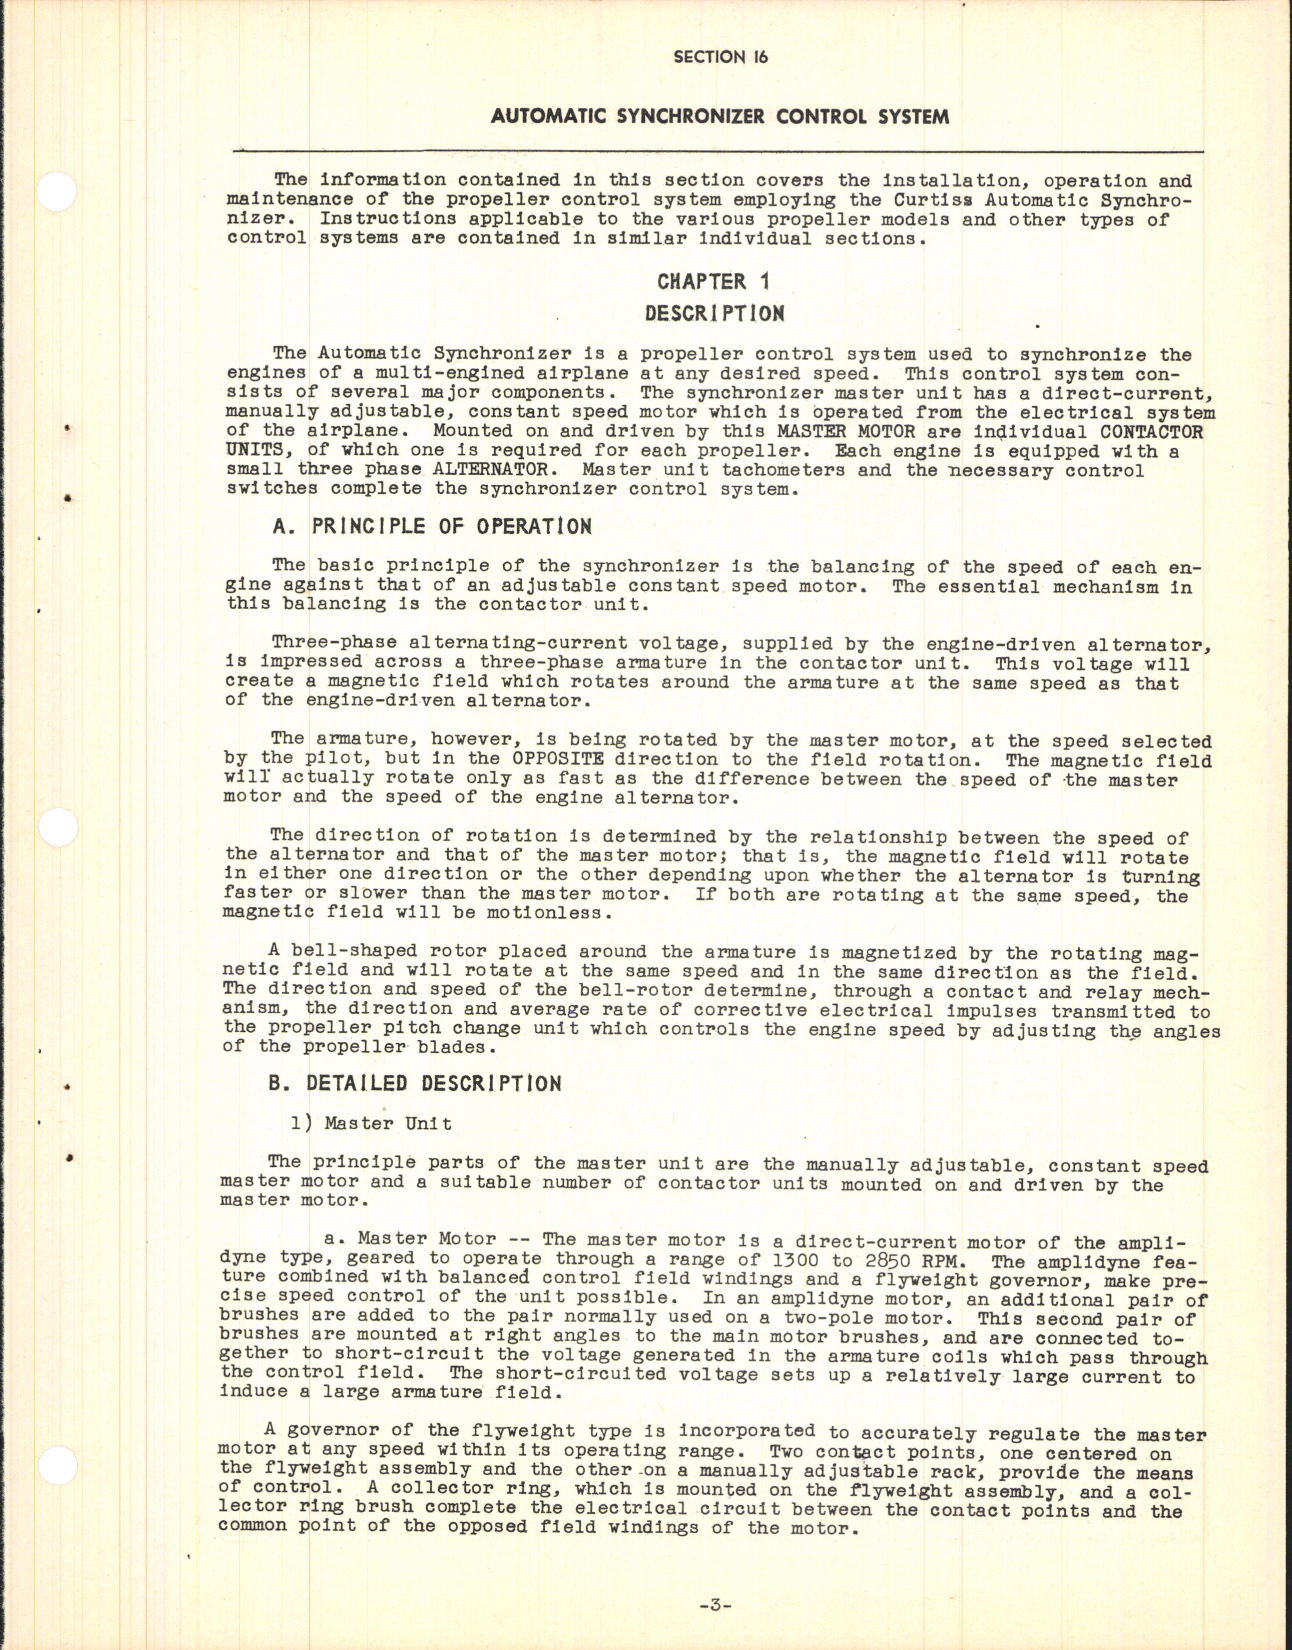 Sample page 5 from AirCorps Library document: Section 16 - Automatic Synchronizer Control System